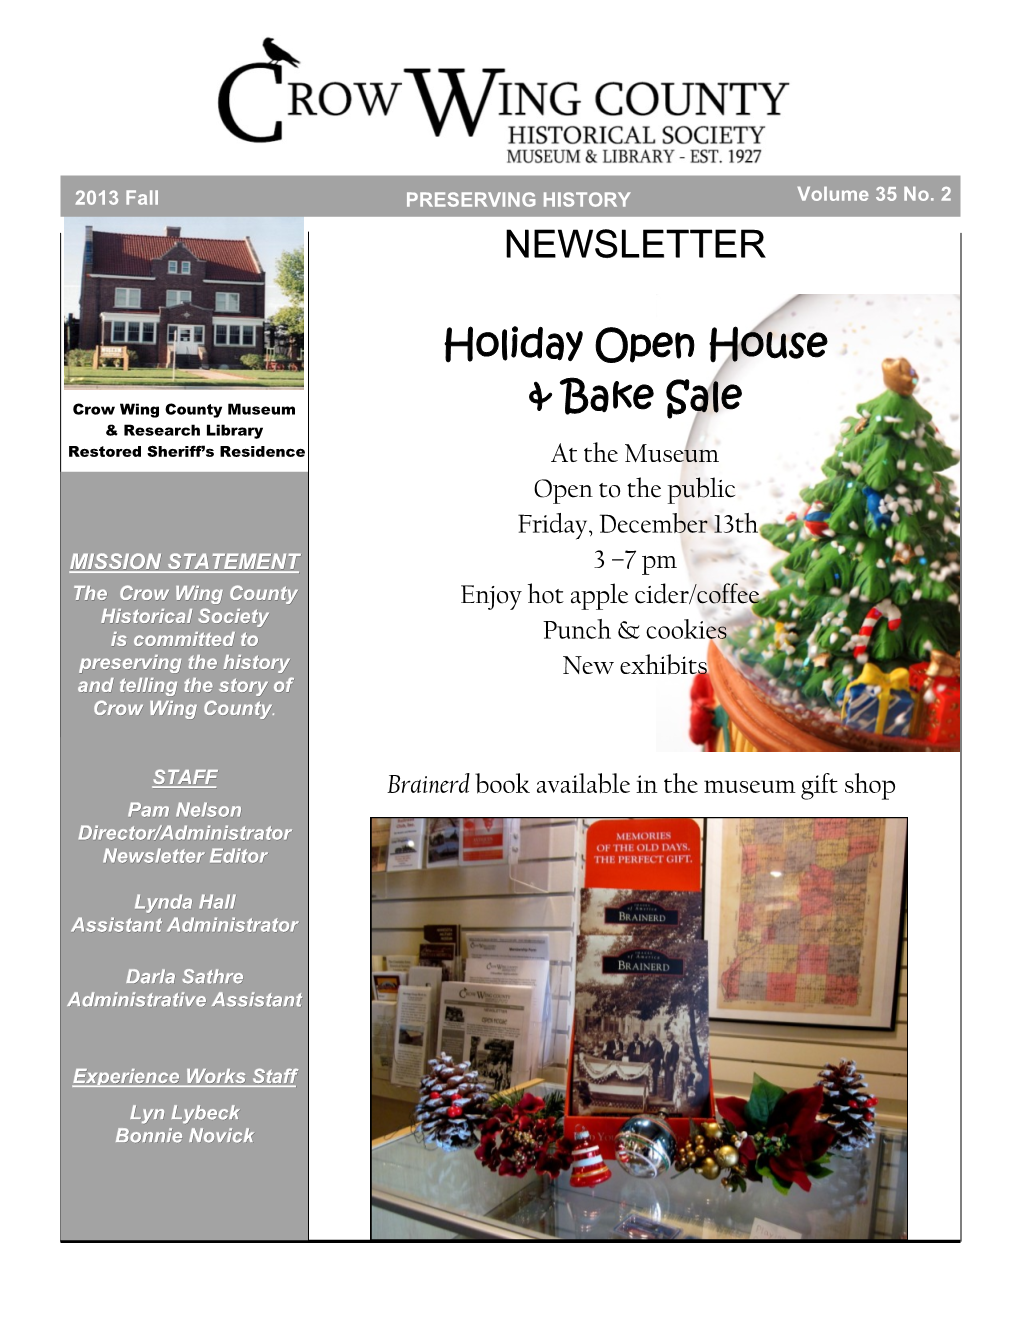 NEWSLETTER Holiday Open House & Bake Sale